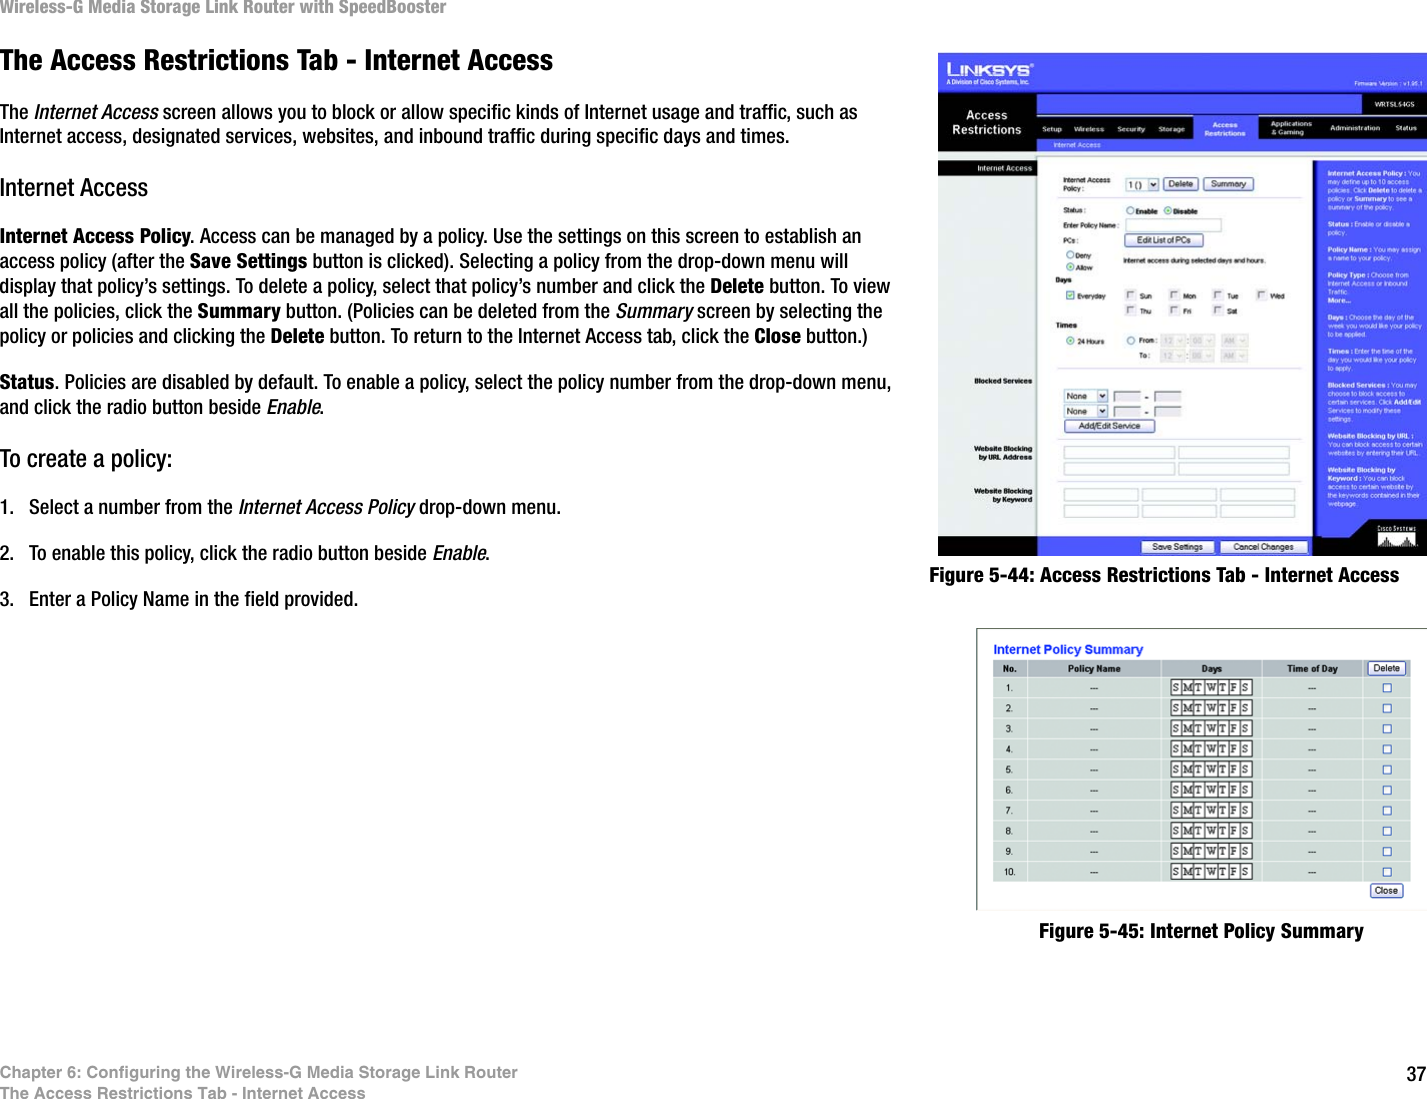 37Chapter 6: Configuring the Wireless-G Media Storage Link RouterThe Access Restrictions Tab - Internet AccessWireless-G Media Storage Link Router with SpeedBoosterFigure 5-44: Access Restrictions Tab - Internet AccessFigure 5-45: Internet Policy SummaryThe Access Restrictions Tab - Internet AccessThe Internet Access screen allows you to block or allow specific kinds of Internet usage and traffic, such as Internet access, designated services, websites, and inbound traffic during specific days and times.Internet AccessInternet Access Policy. Access can be managed by a policy. Use the settings on this screen to establish an access policy (after the Save Settings button is clicked). Selecting a policy from the drop-down menu will display that policy’s settings. To delete a policy, select that policy’s number and click the Delete button. To view all the policies, click the Summary button. (Policies can be deleted from the Summary screen by selecting the policy or policies and clicking the Delete button. To return to the Internet Access tab, click the Close button.)Status. Policies are disabled by default. To enable a policy, select the policy number from the drop-down menu, and click the radio button beside Enable.To create a policy:1. Select a number from the Internet Access Policy drop-down menu.2. To enable this policy, click the radio button beside Enable.3. Enter a Policy Name in the field provided. 